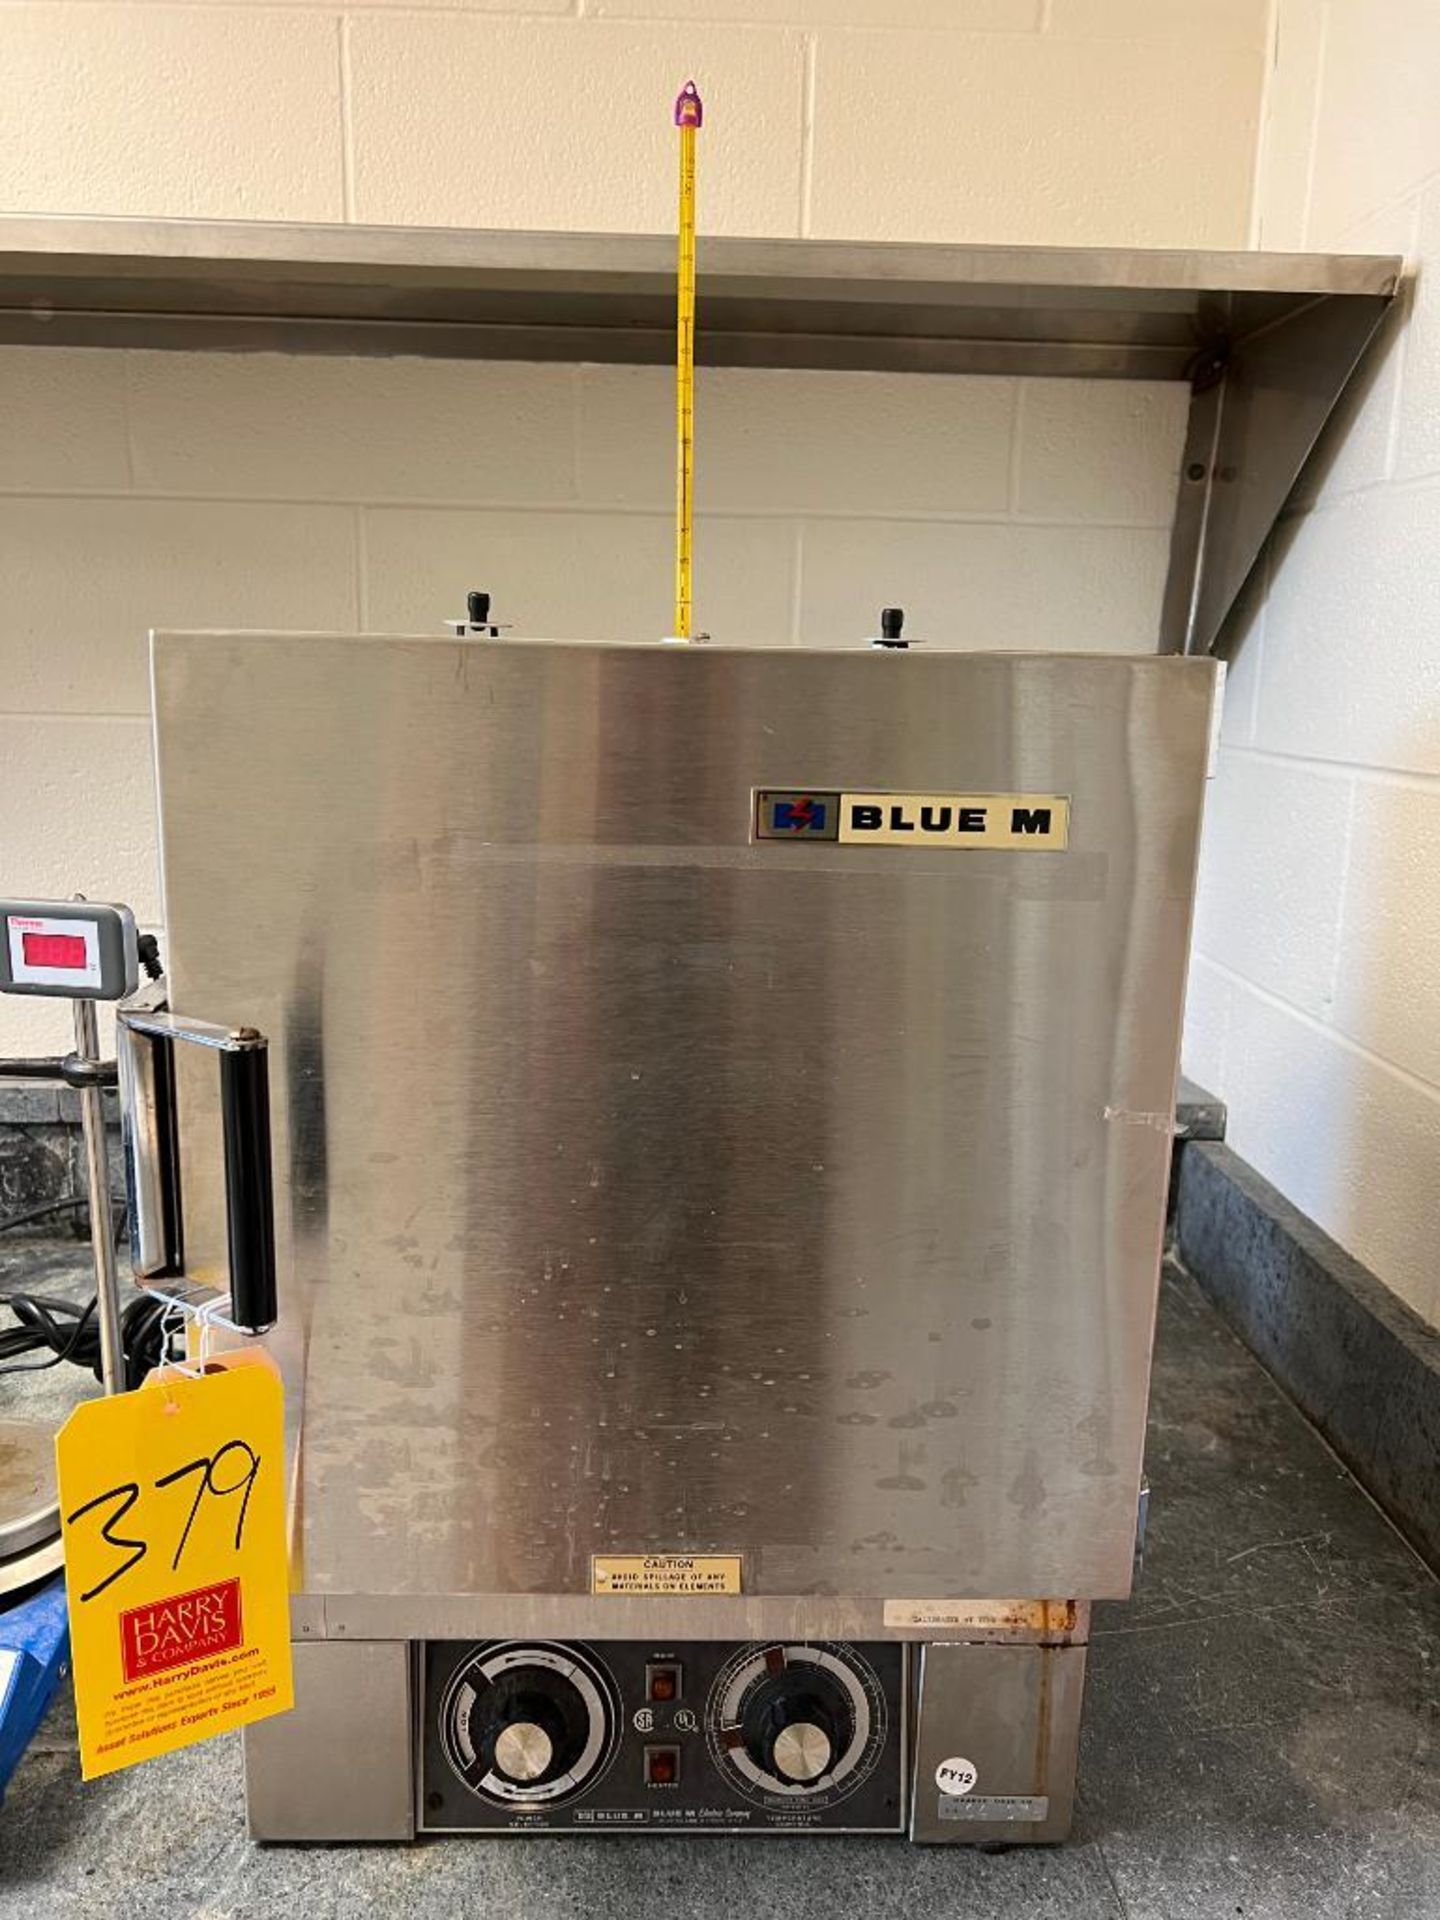 Blue M Electric Company Stabil-Therm Gravity Oven - Rigging Fee: $50